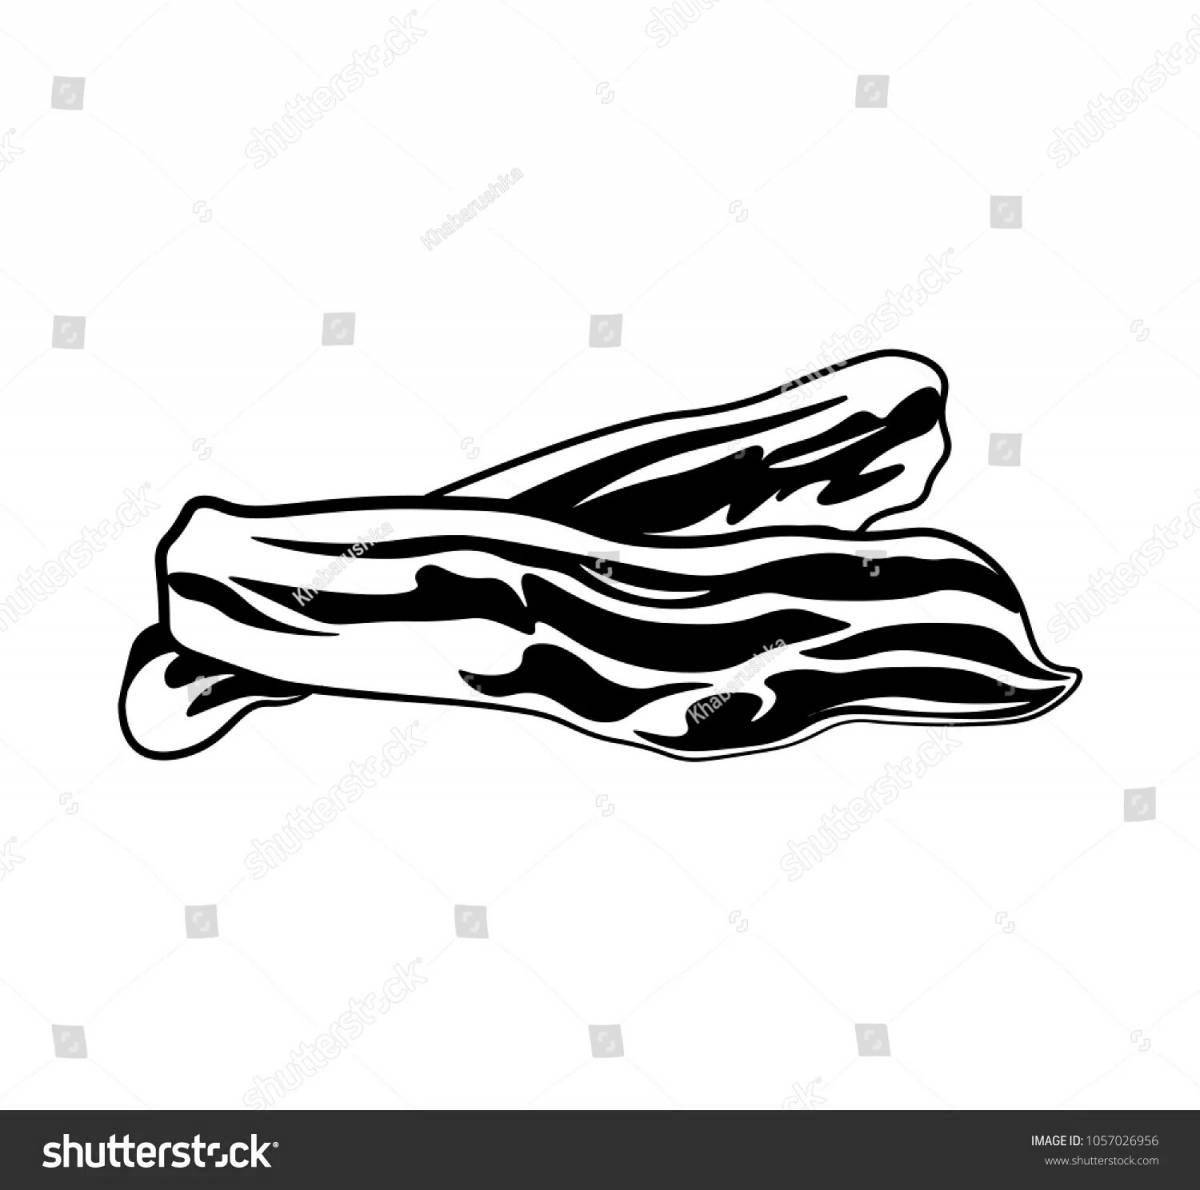 Playful bacon coloring page